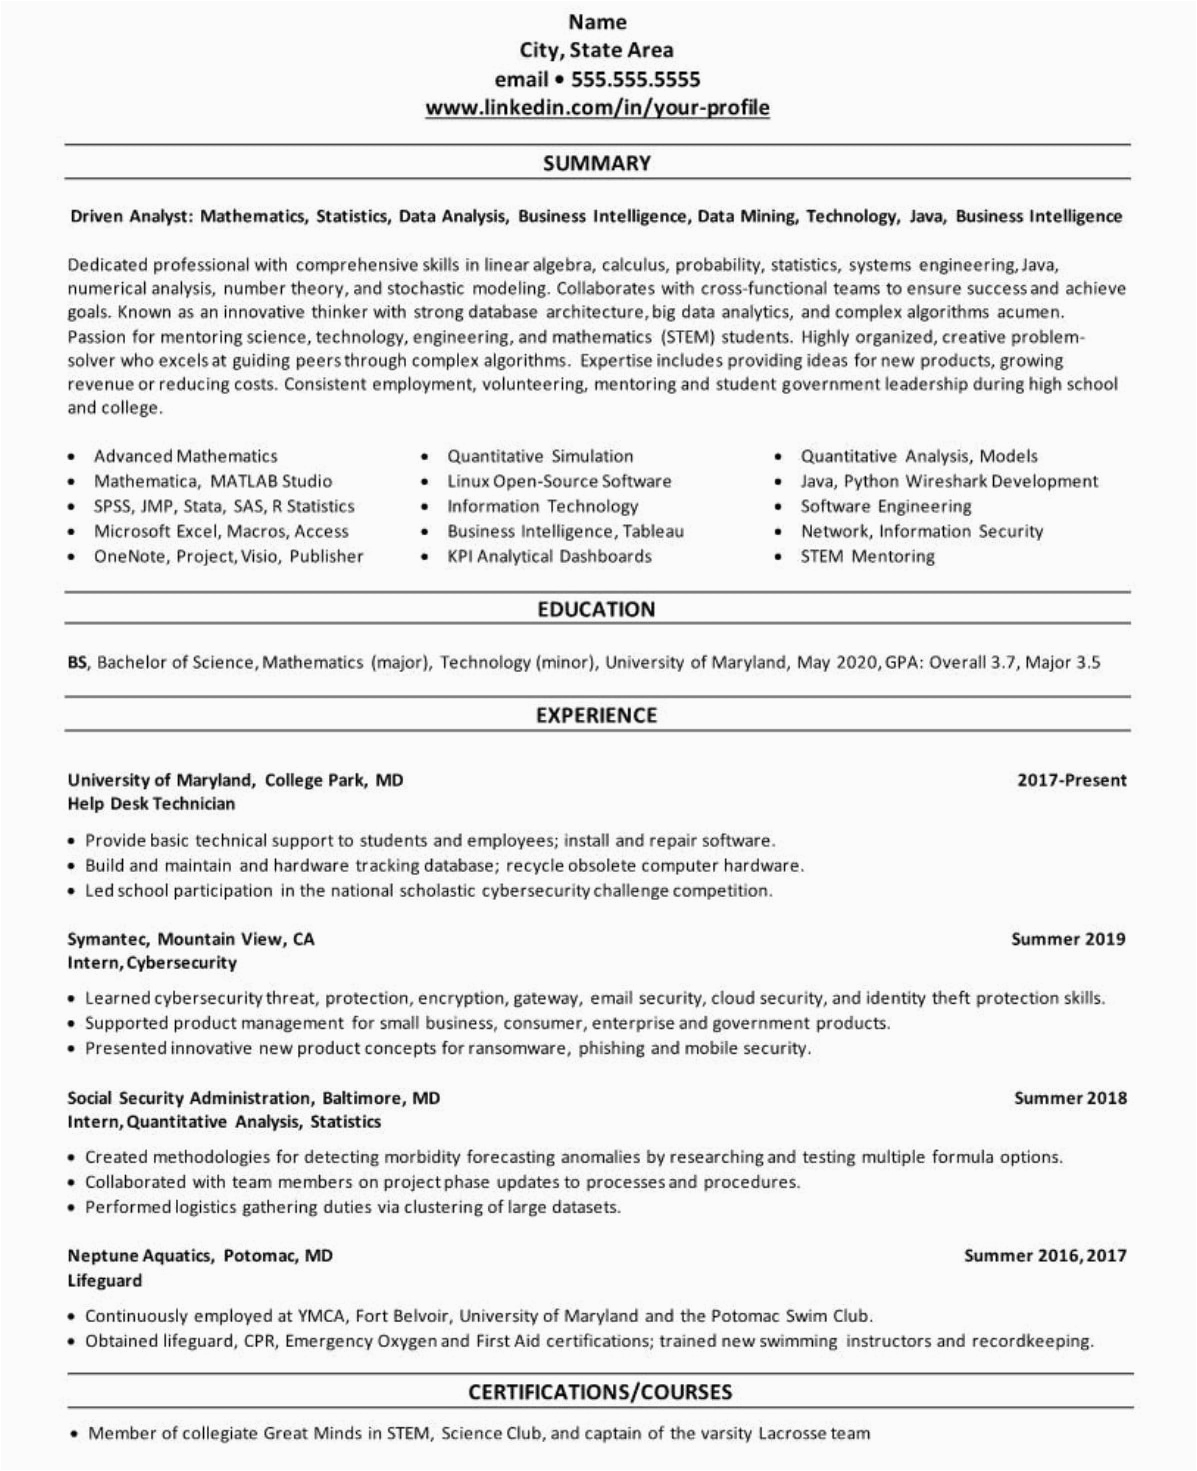 Sample Resume Profile for College Student Linkedin Profile Resume Example College University Student